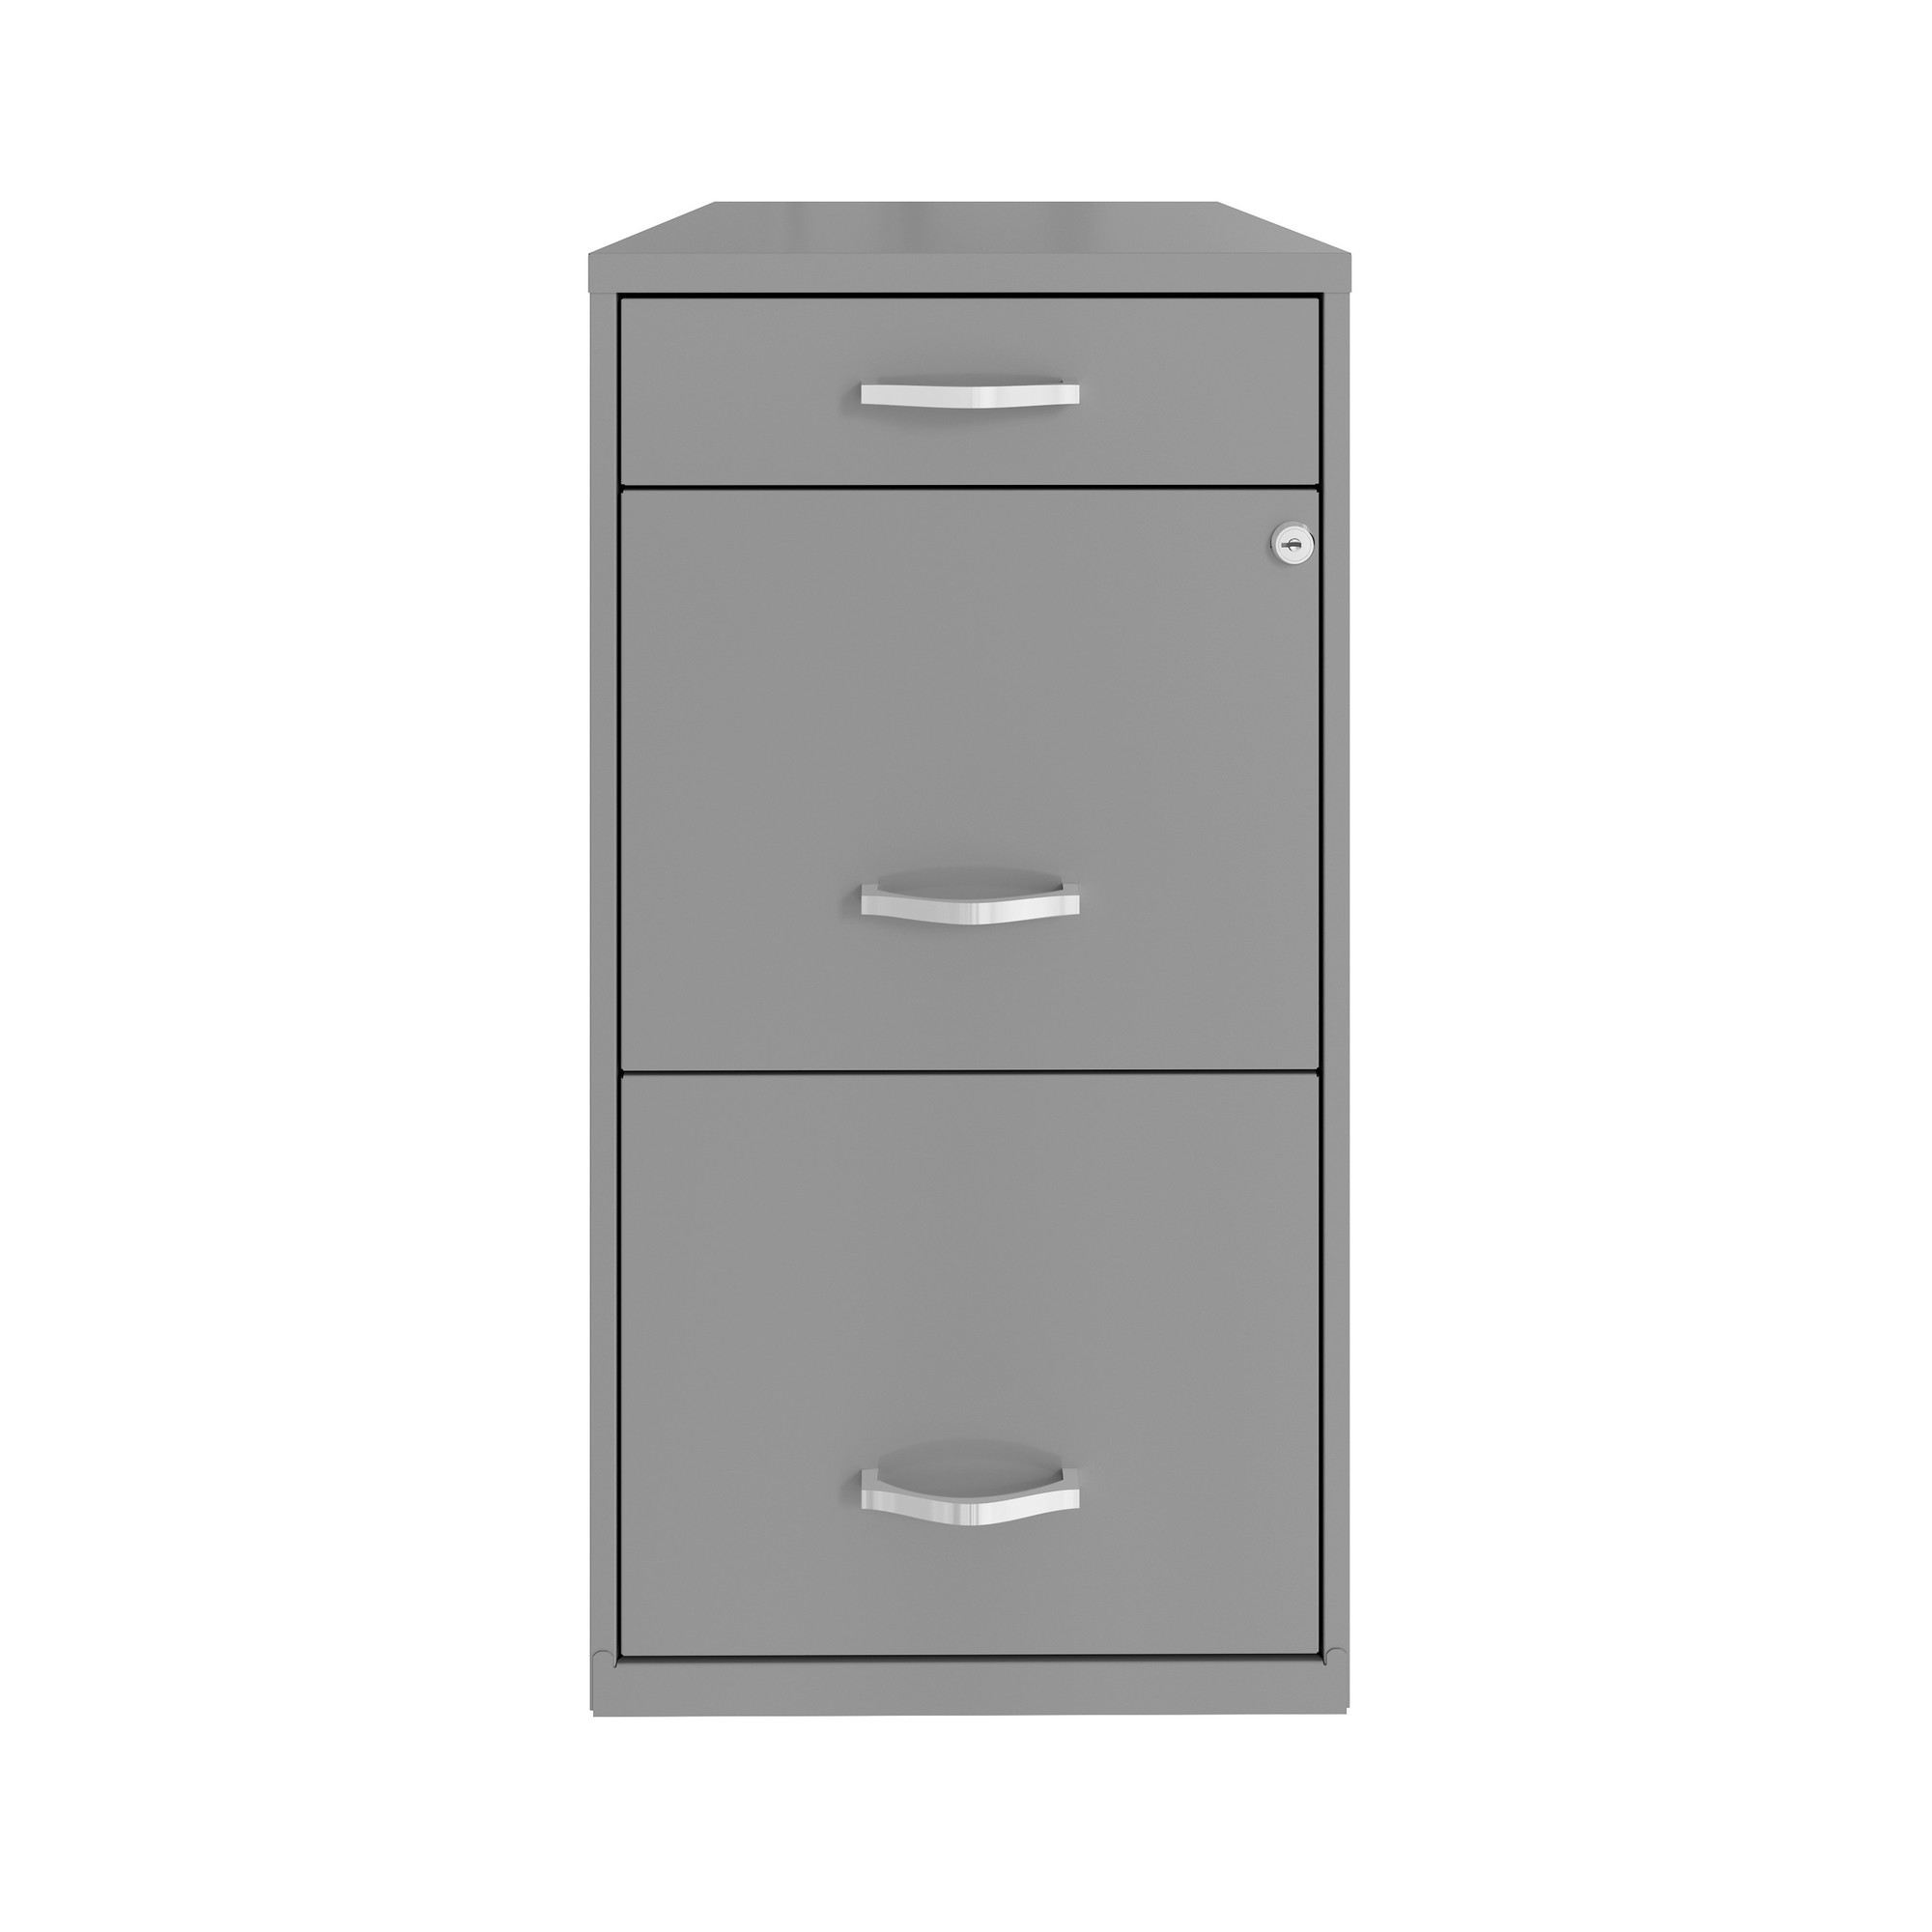 Hirsh Industries, 3 Drawer Letter Width File Cabinet, Pencil Drawer, Width 14.25 in, Depth 18 in, Height 27.32 in, Model 24413